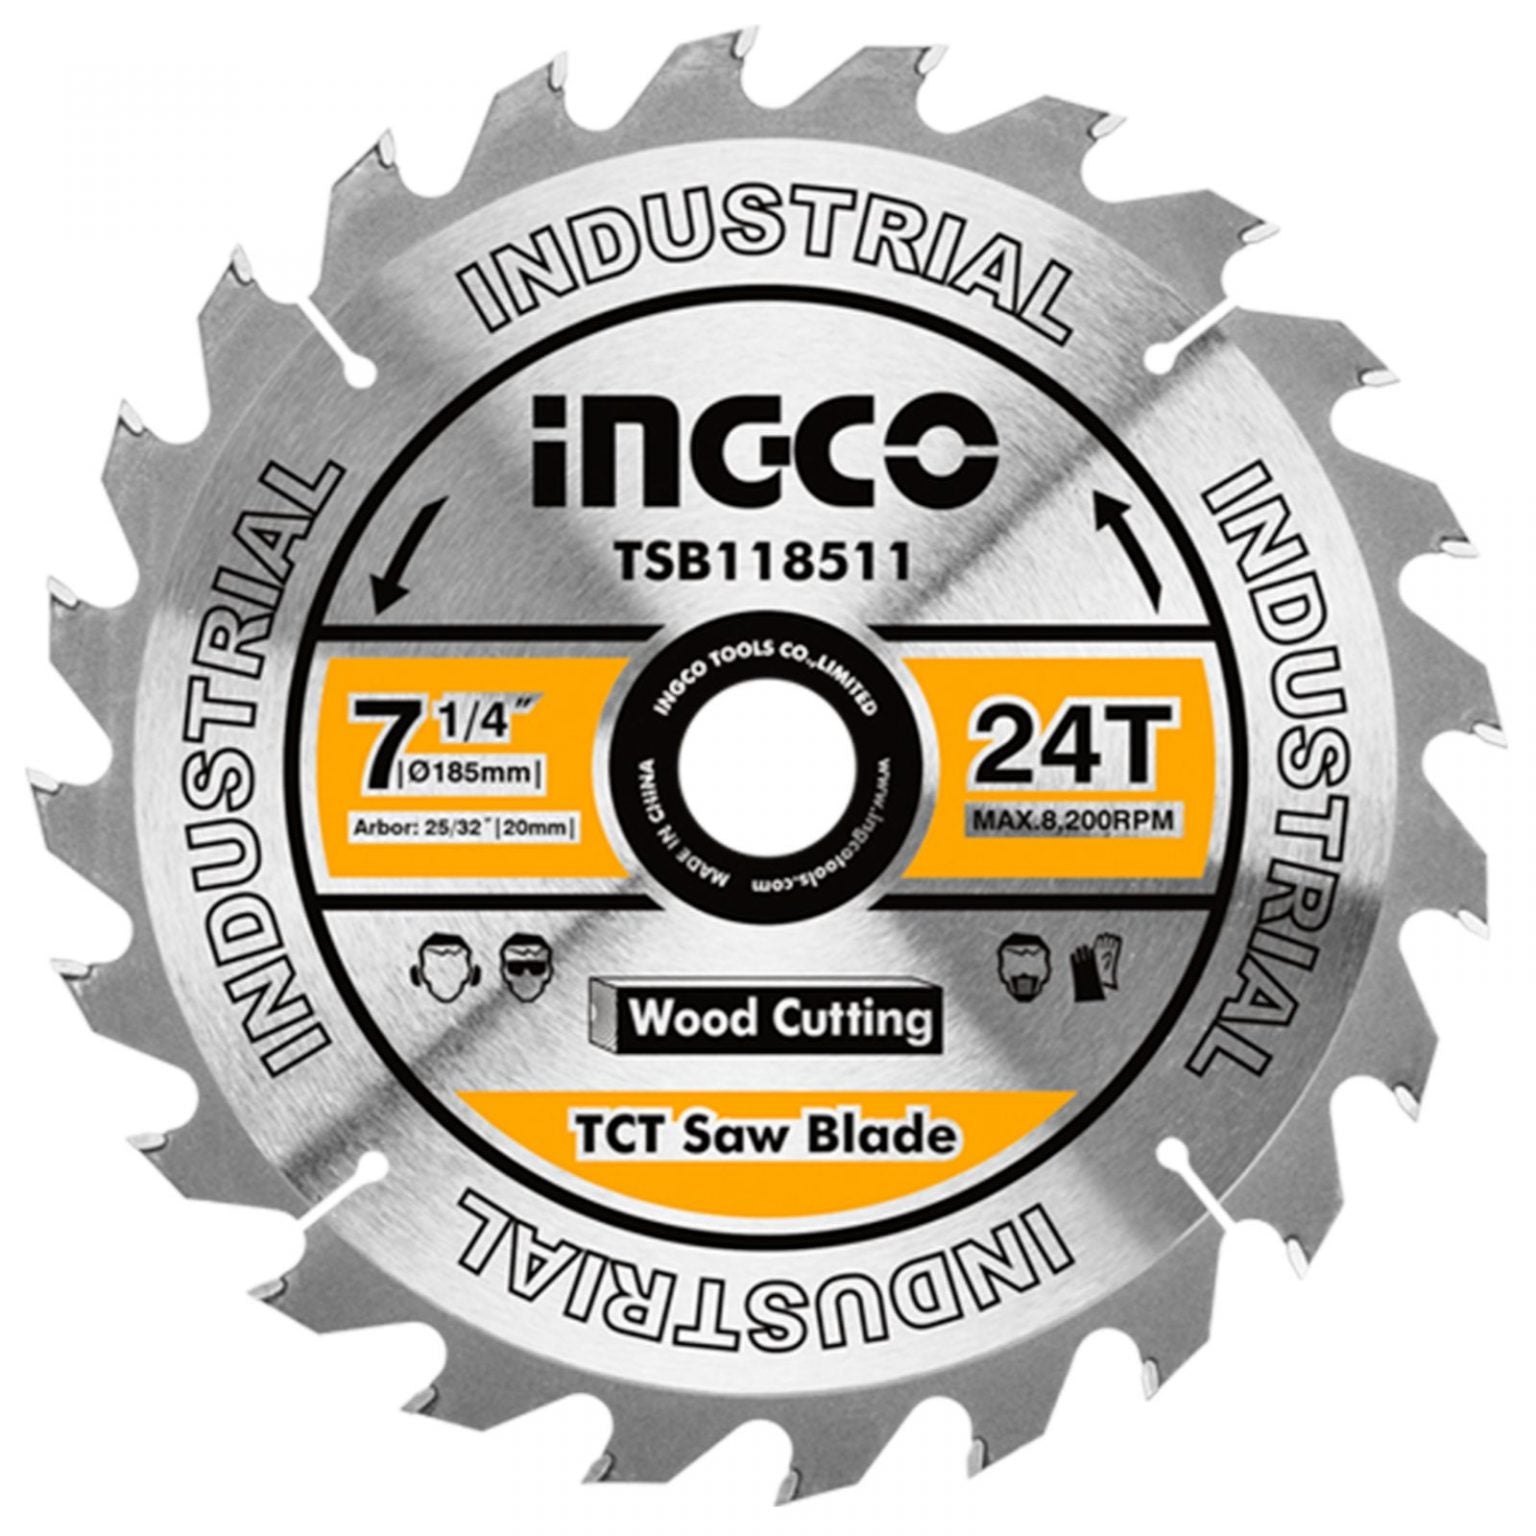 Ingco - TCT Saw Blade 165mm x 24 Teeth (Launch Special) - Future Light - LED Lights South Africa